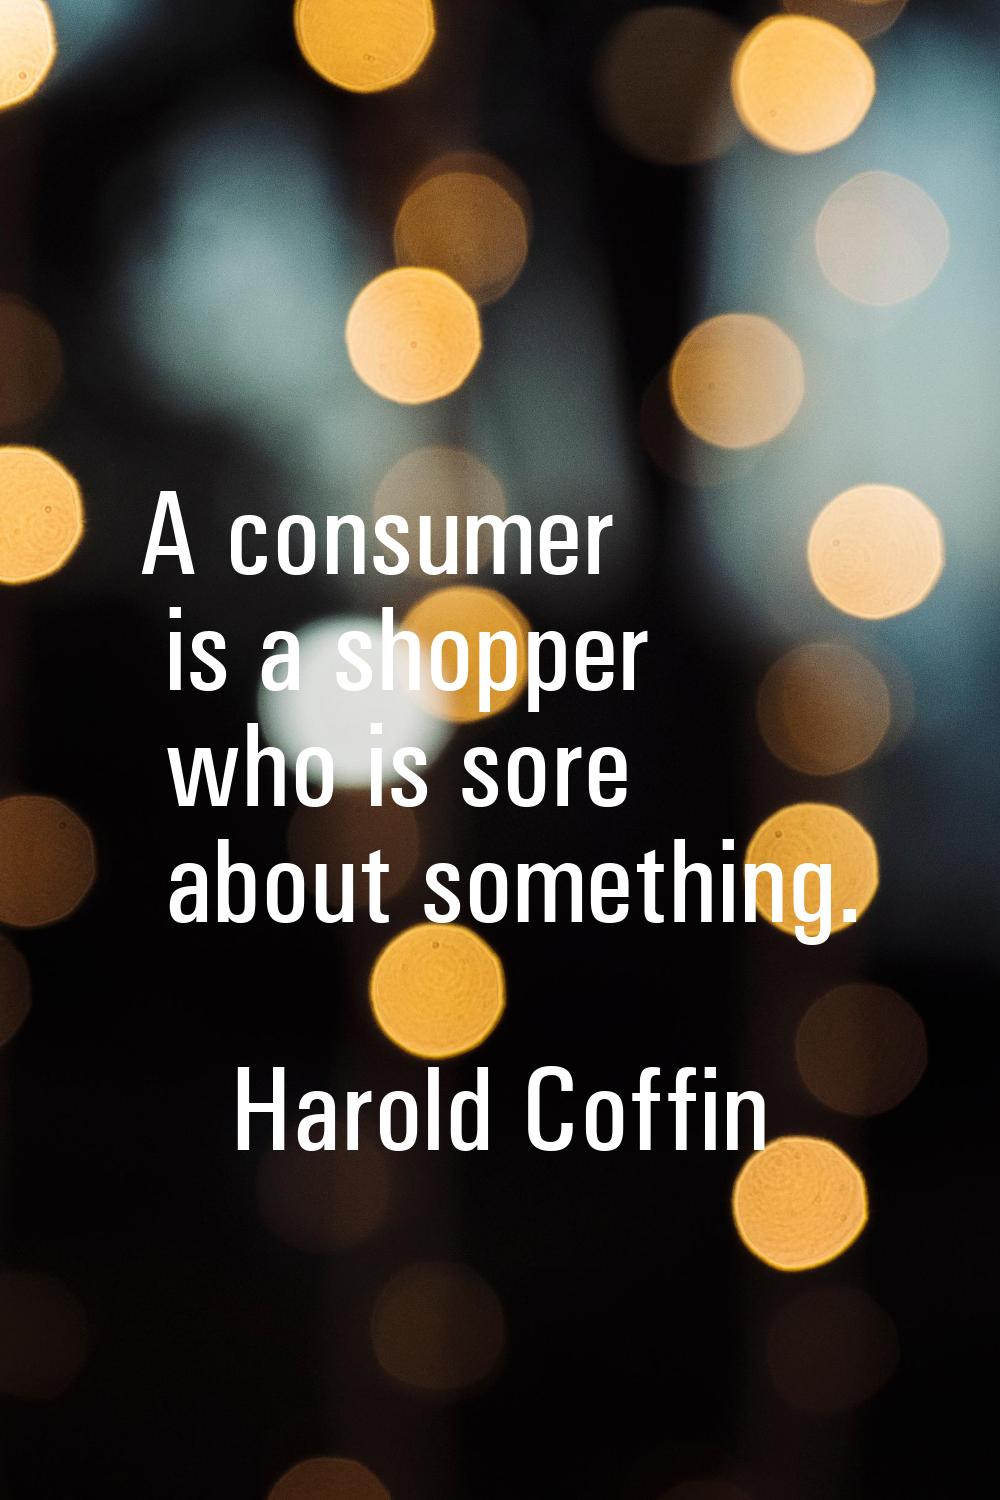 A consumer is a shopper who is sore about something.